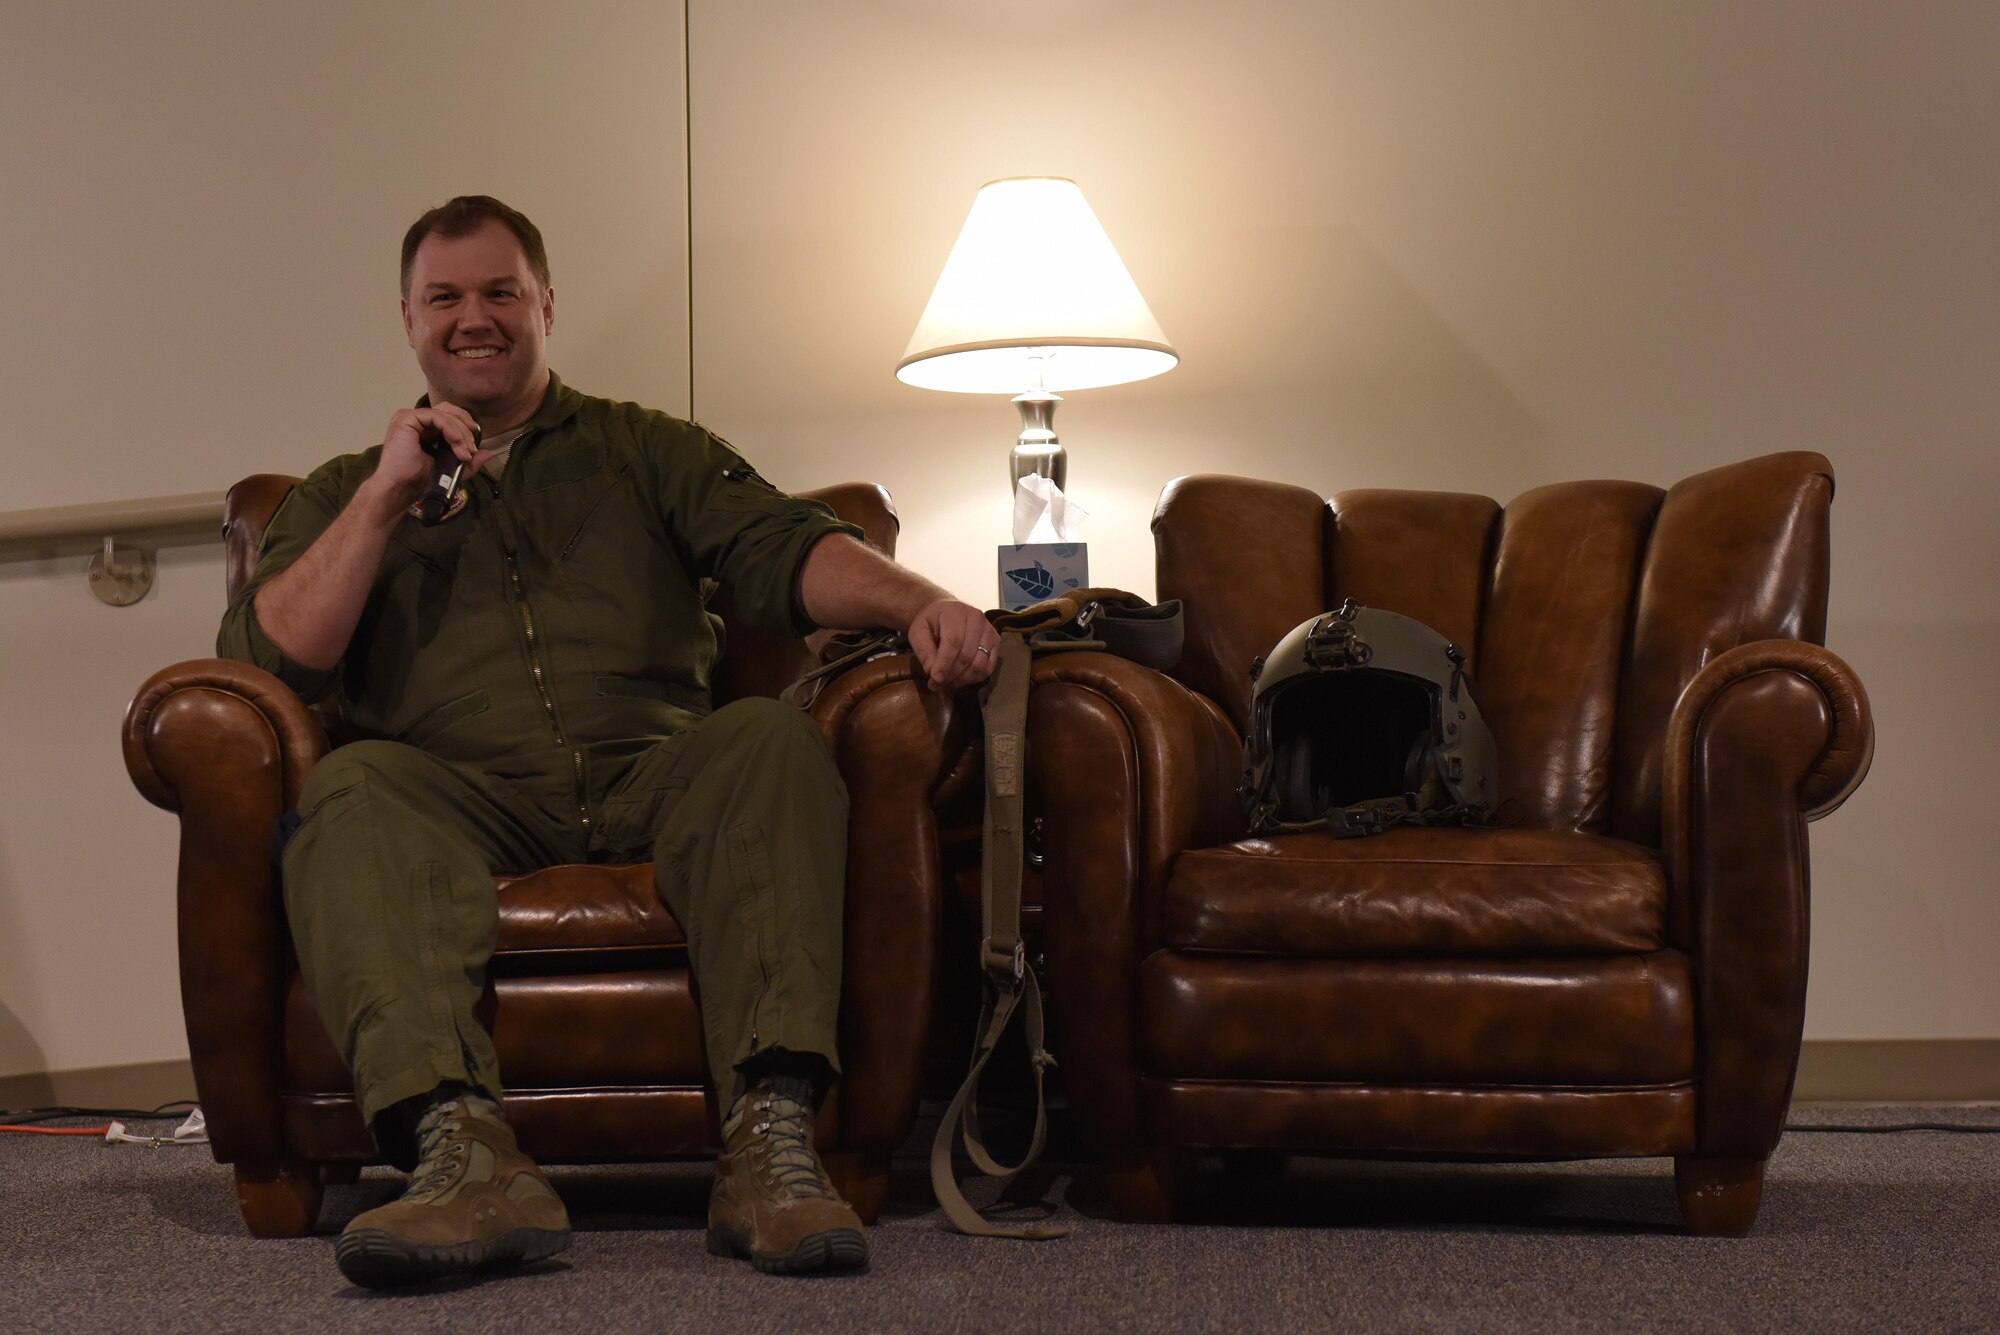 Tech. Sgt. Adam, 66th Rescue Squadron special missions aviator, describes what it felt like to be involved in a helicopter crash during a Storytellers event in the Creech auditorium, October 18, 2017. Adam only shared this story to his first sergeant to apply for Storytellers, a few months before publicly sharing it with Creech Airmen. (U.S. Air Force photo/Airman 1st Class Haley Stevens)